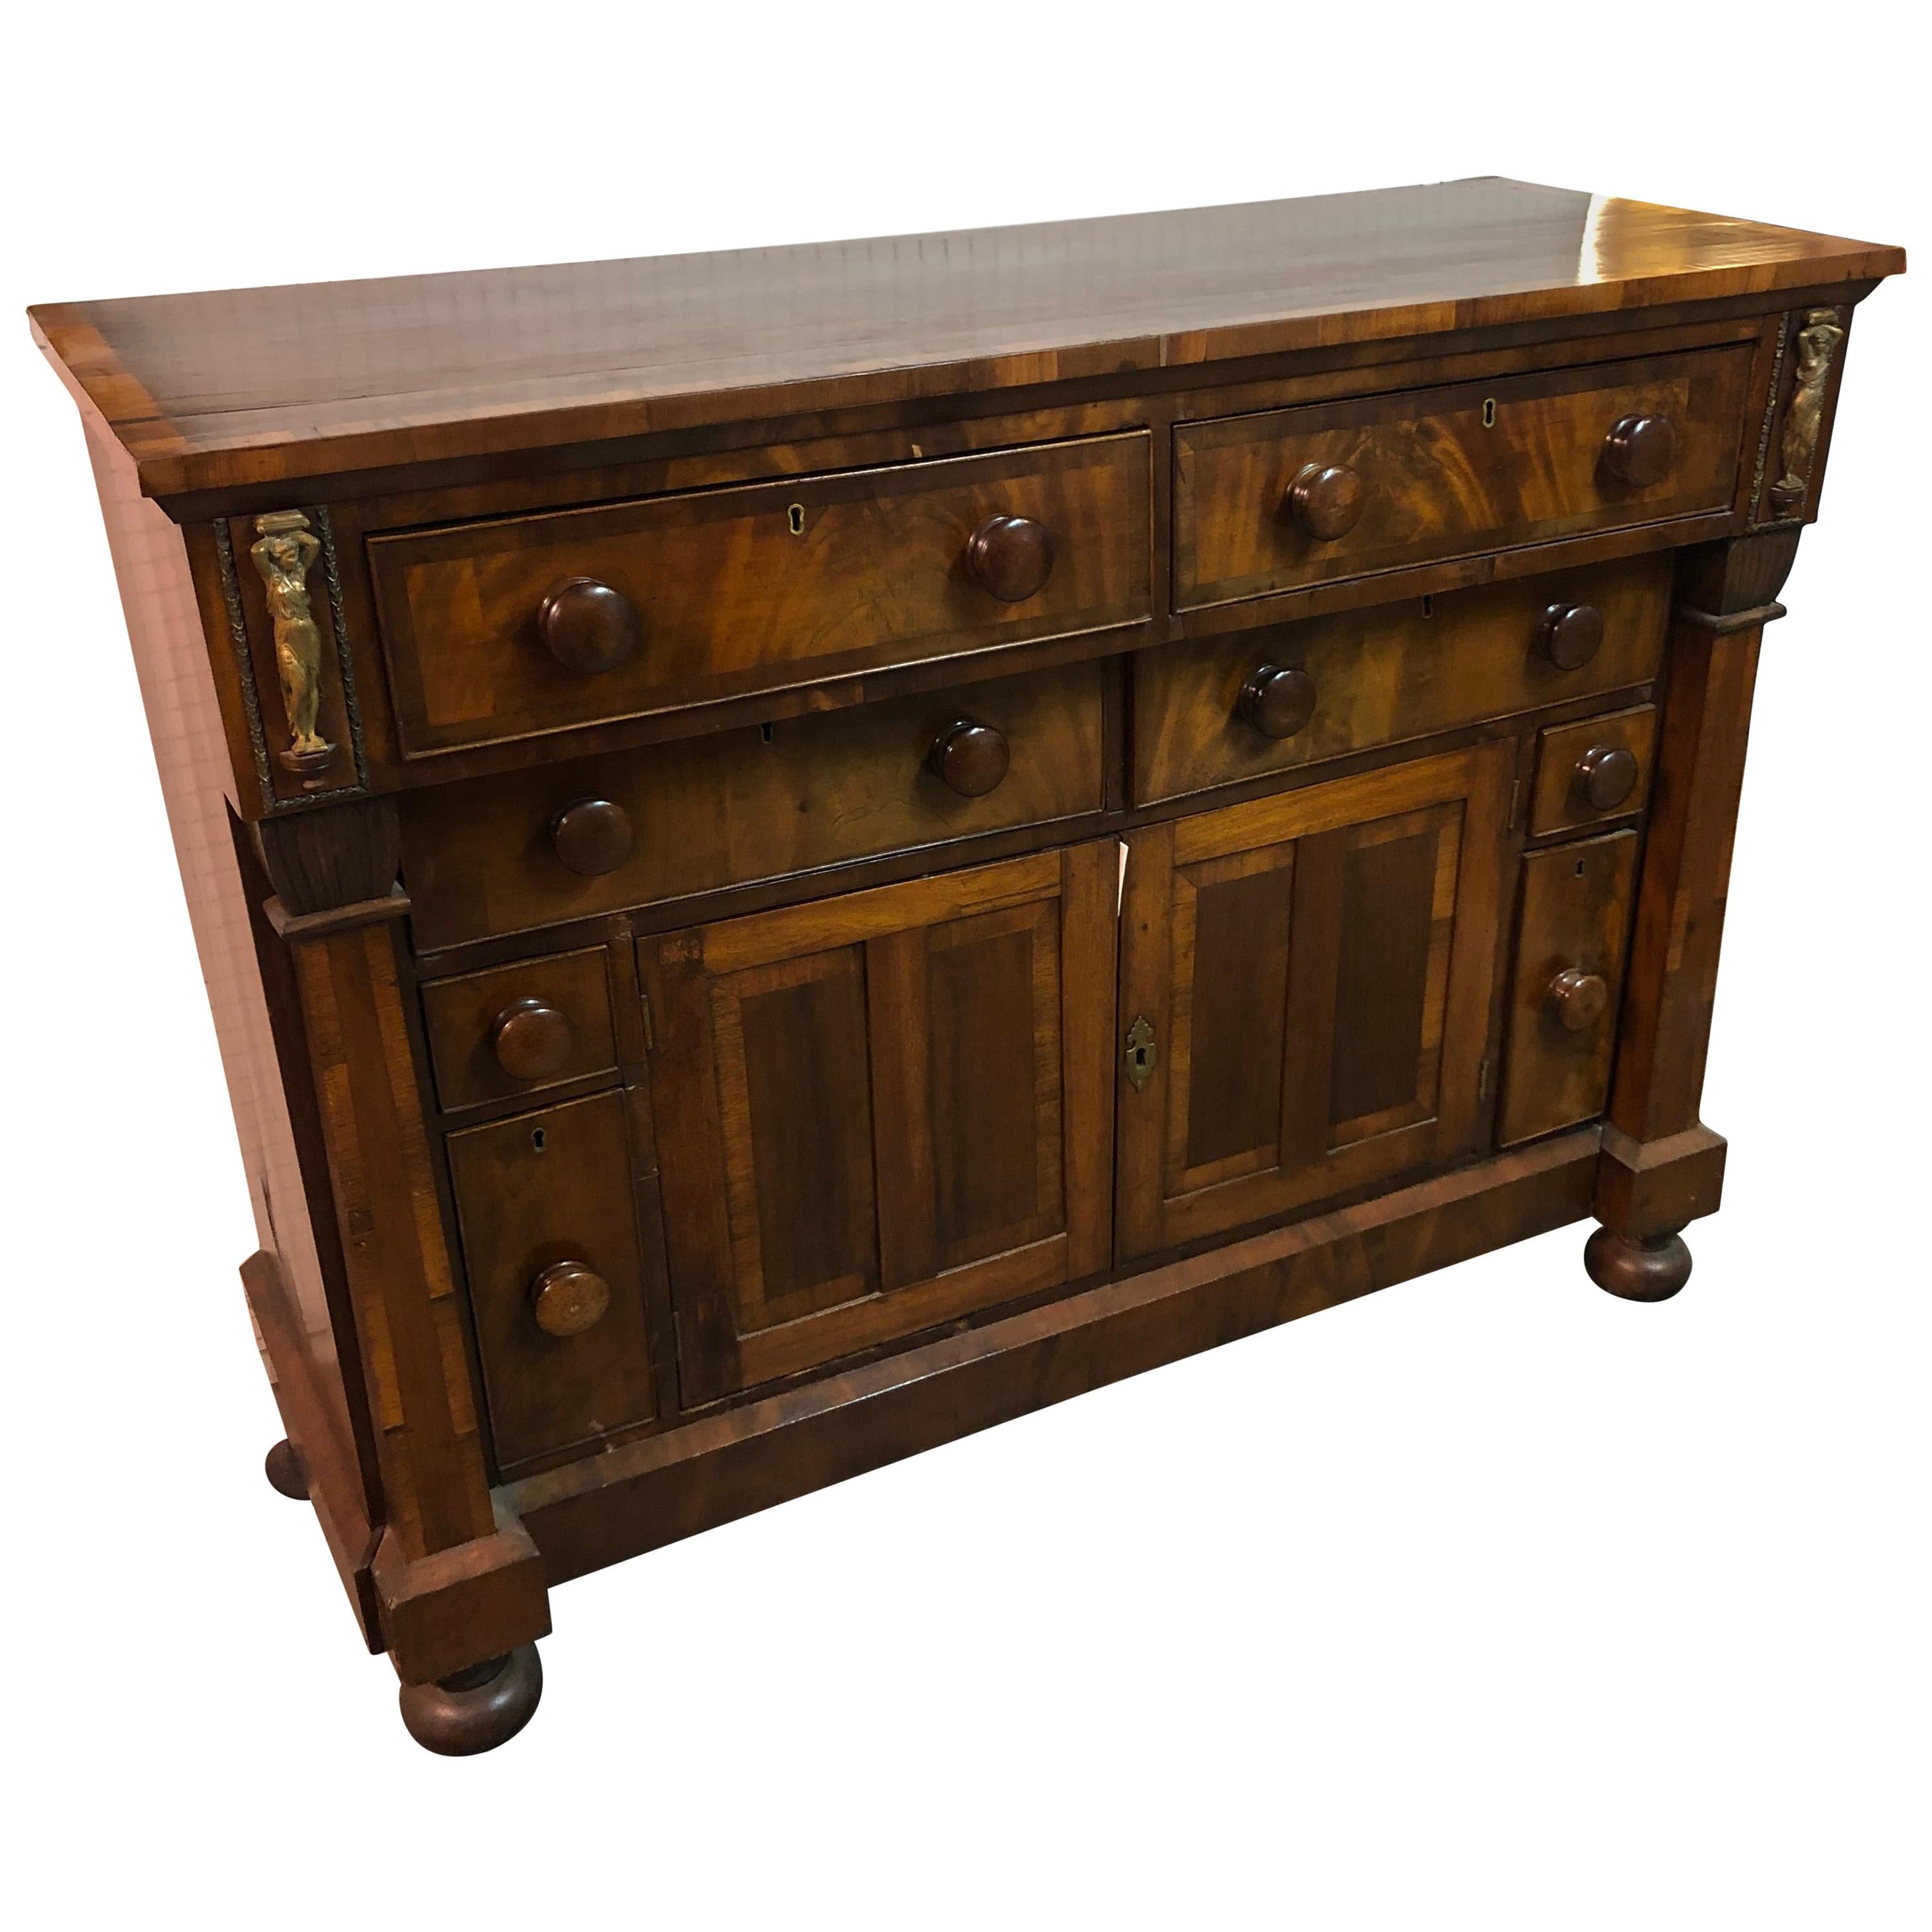 Early 19th Century Old World Empire Mahogany Sideboard with Figural Mounts